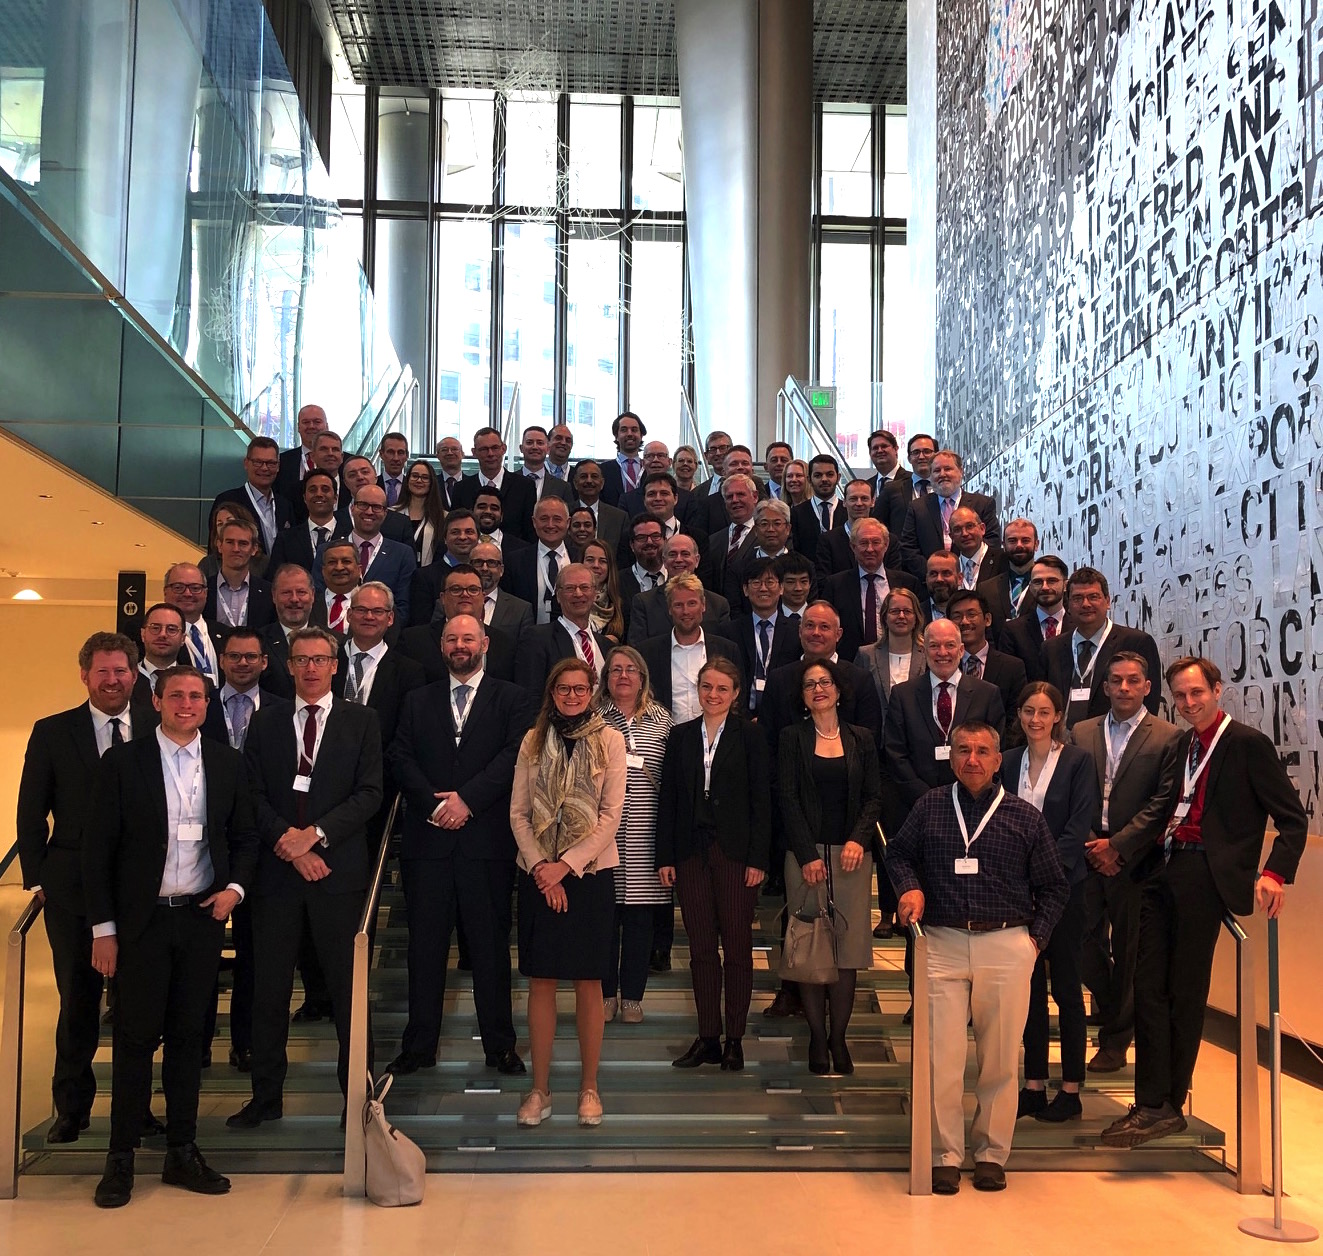 3rd Arctic Shipping Best Practice Forum, Unites States' Embassy, London 2019